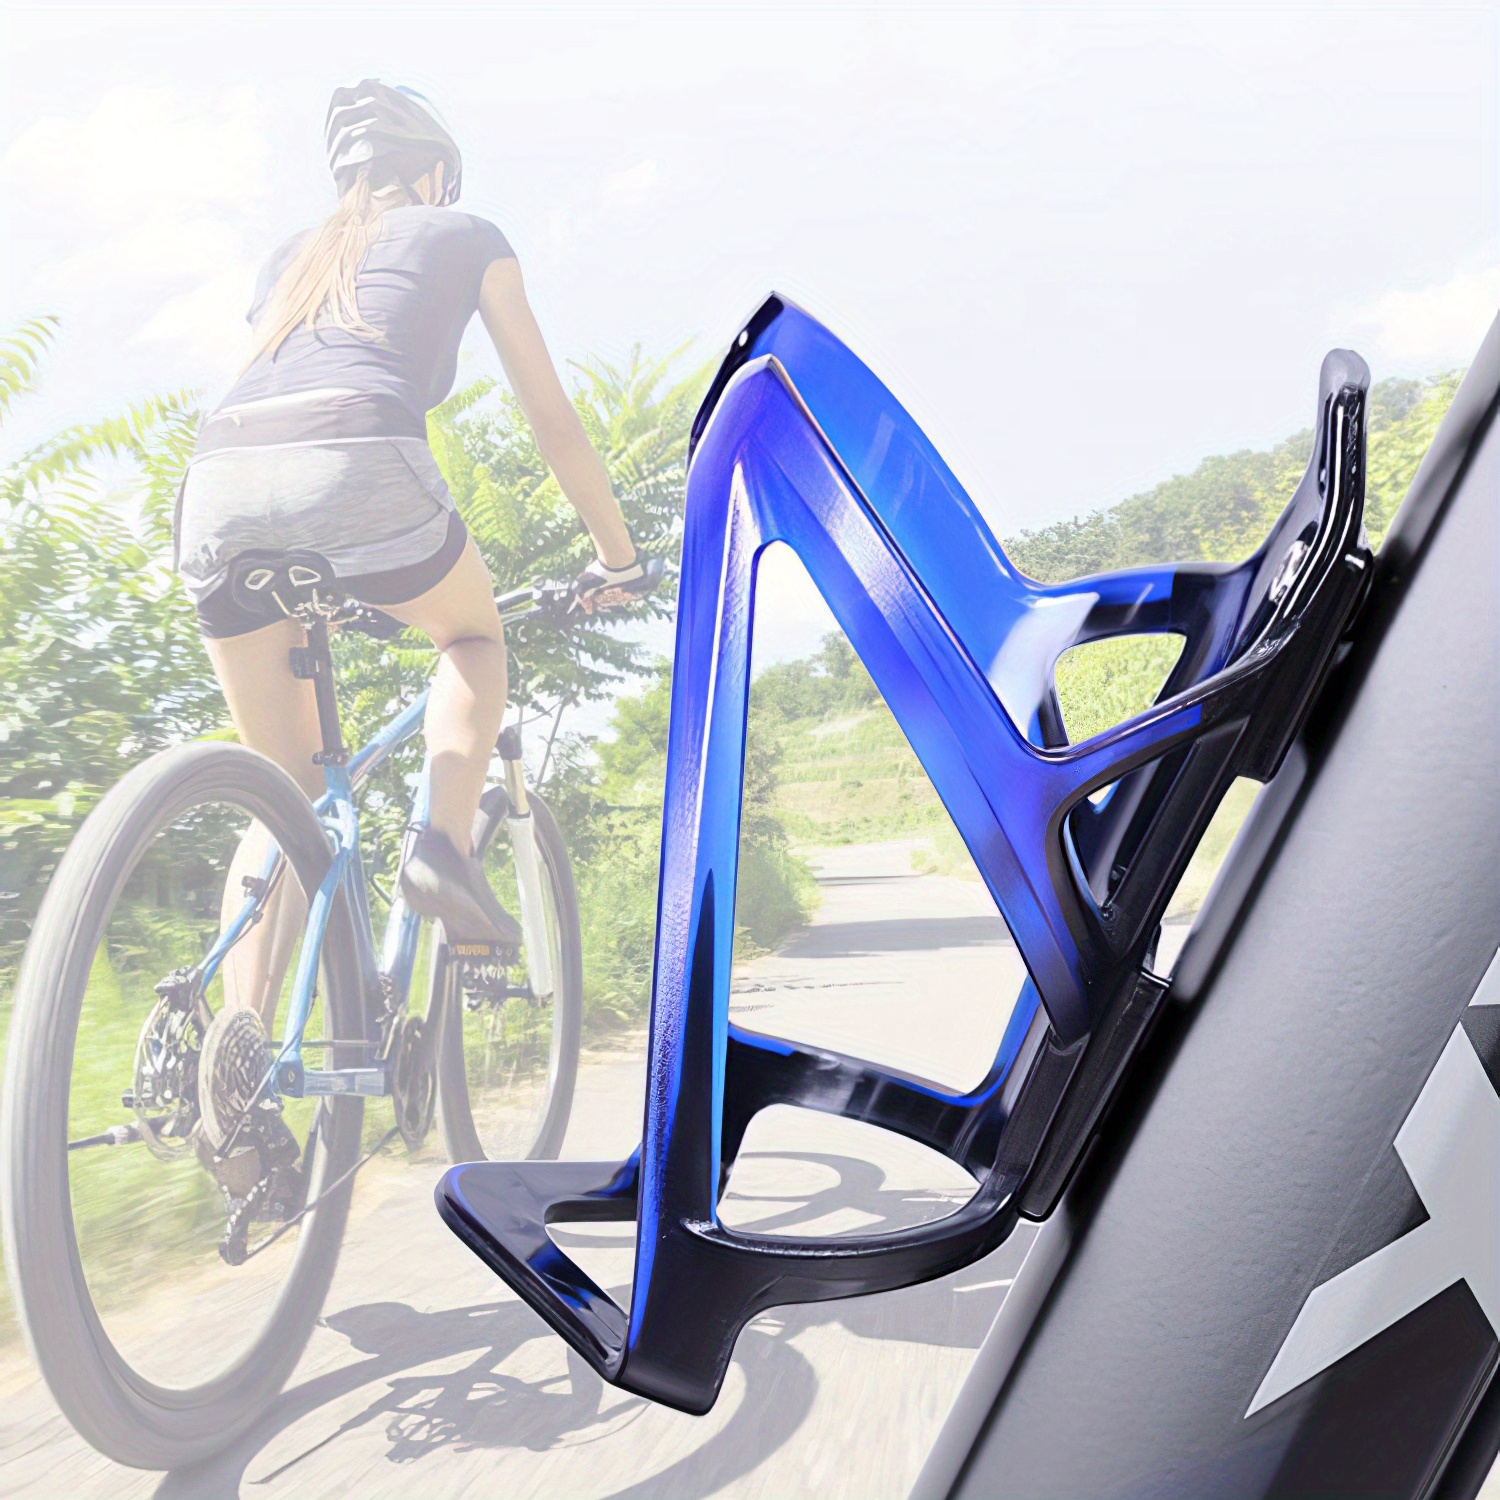 

Bicycle Water Bottle Holder Bracket For Mtb And Road Bikes, Vibrant Lightweight Drink Kettle Cage Rack Carrier, Cycling Riding Accessory